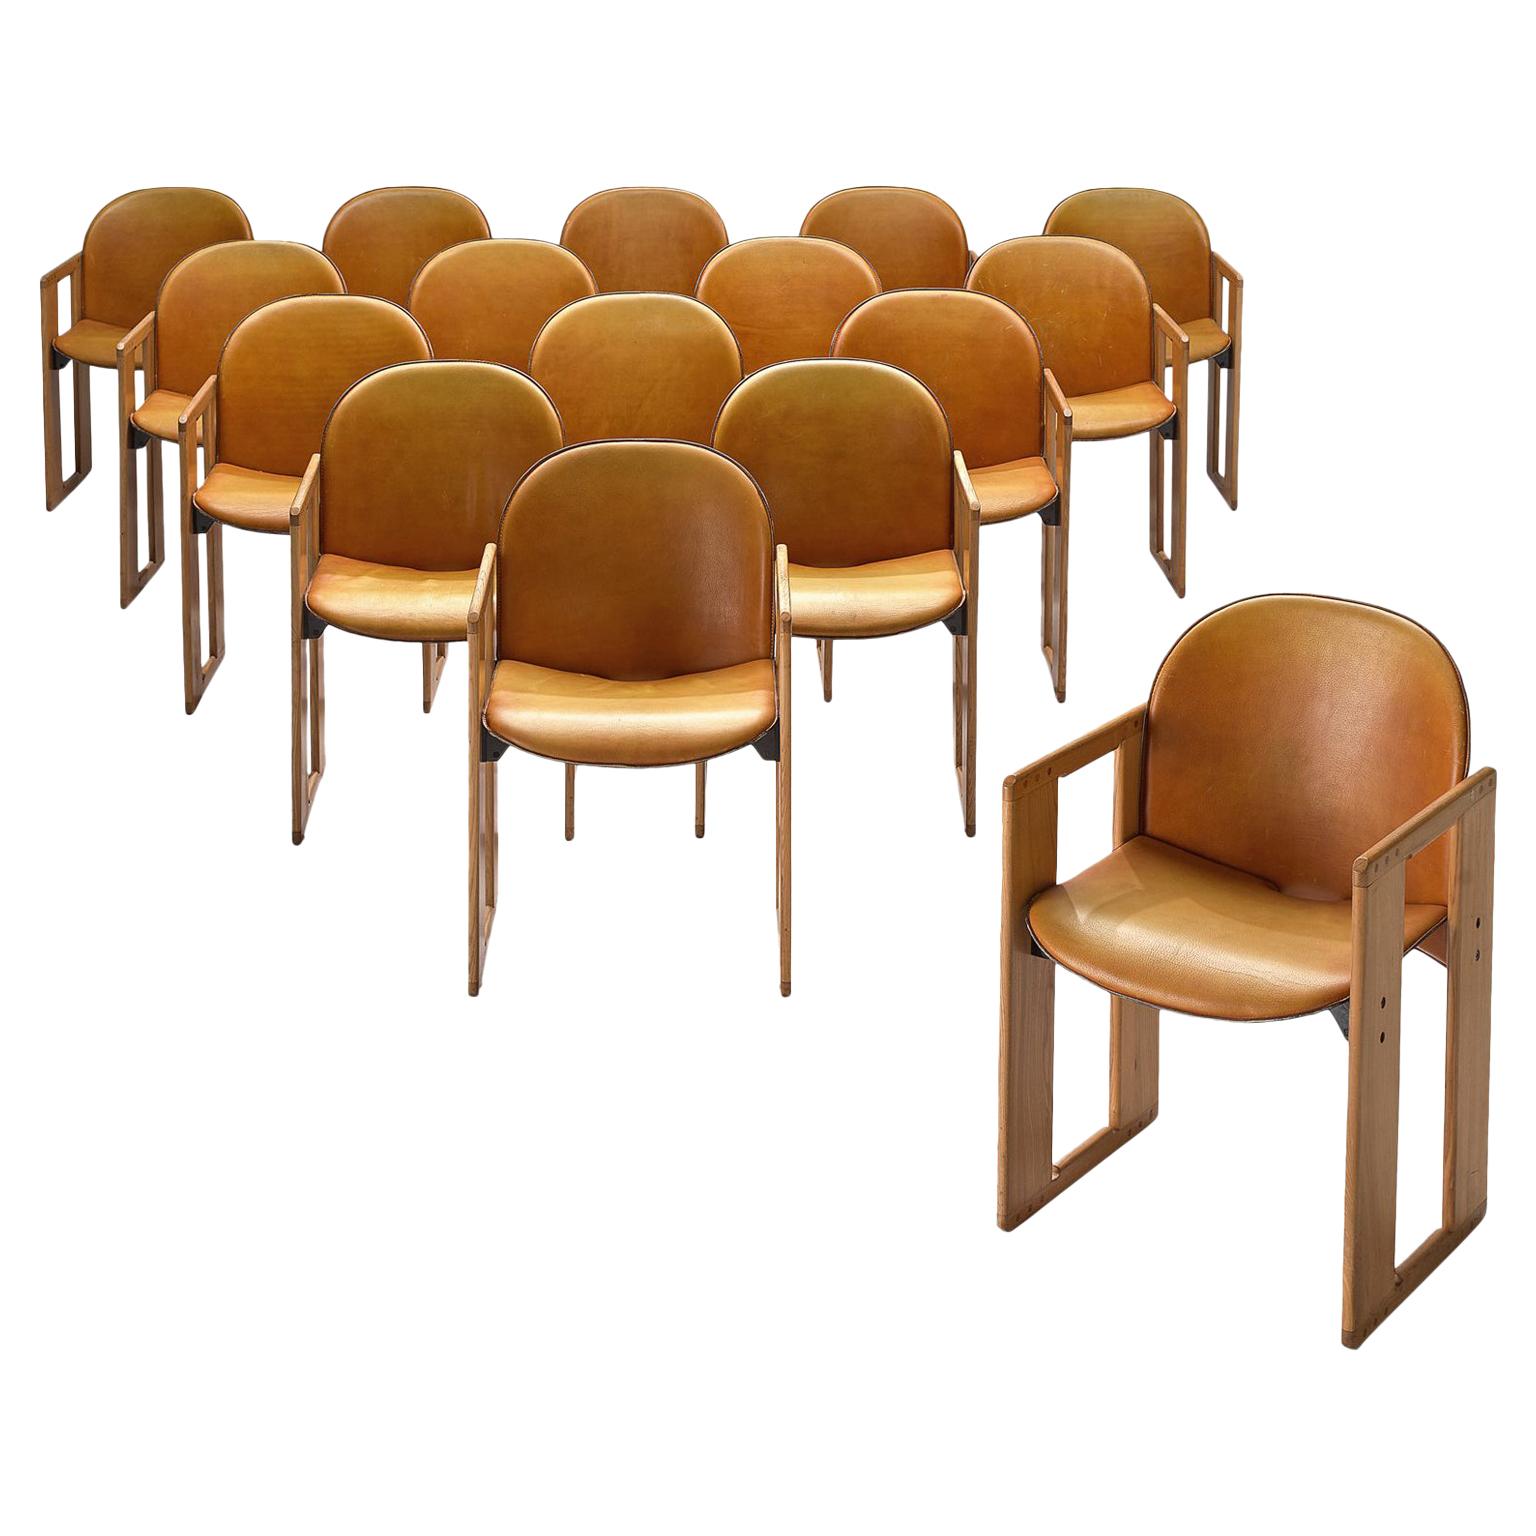 Afra & Tobia Scarpa Dialogo Cognac Leather Dining Chairs